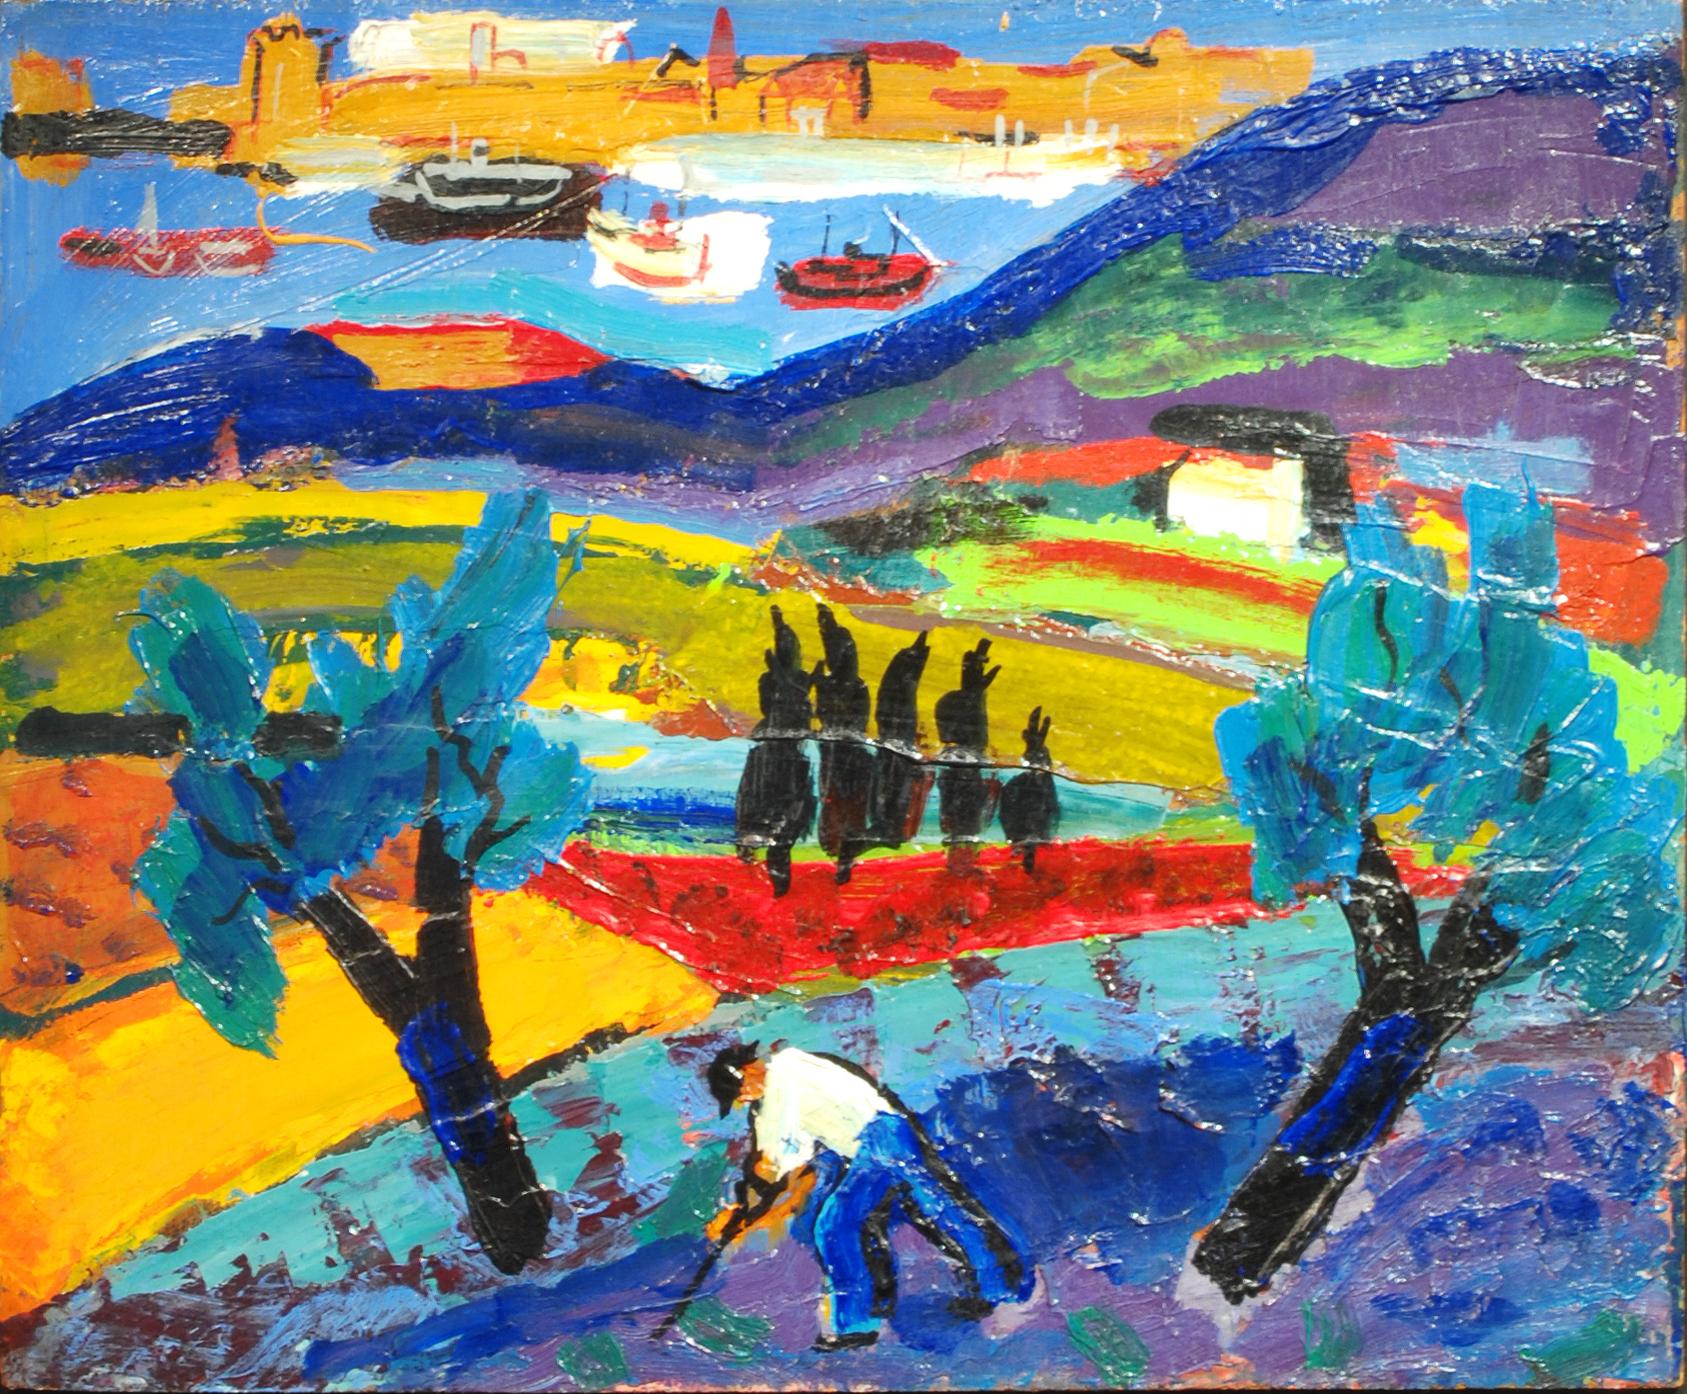 Colourful Abstract French Landscape painting with figure & Olive tree 'Paysage'  - Painting by Pierre Ambrogiani